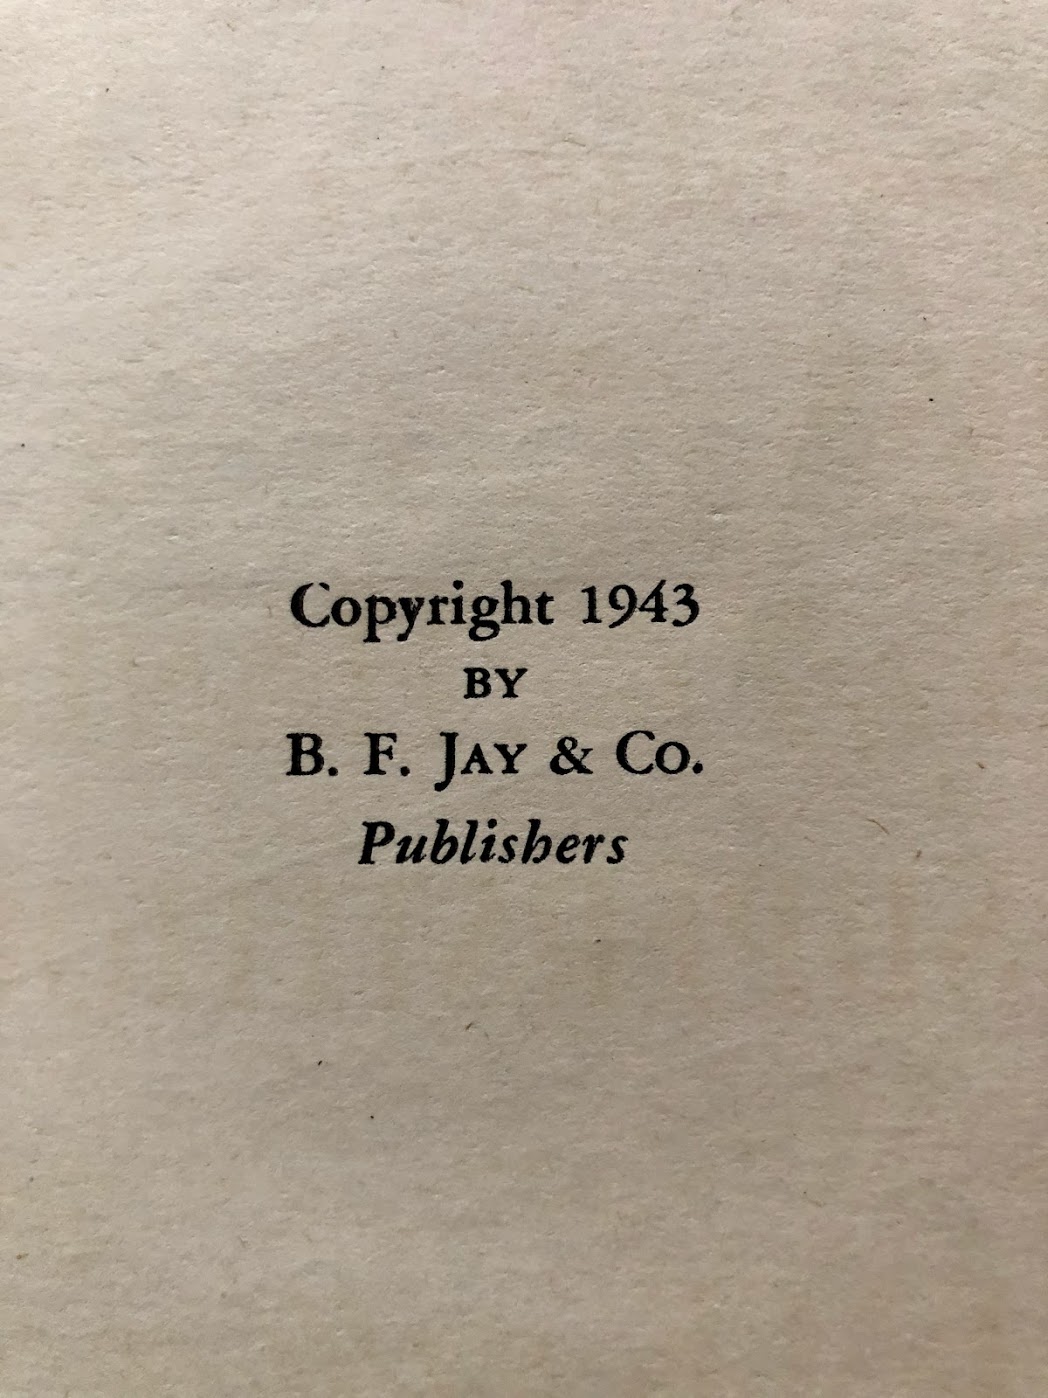 Note Copyright Year